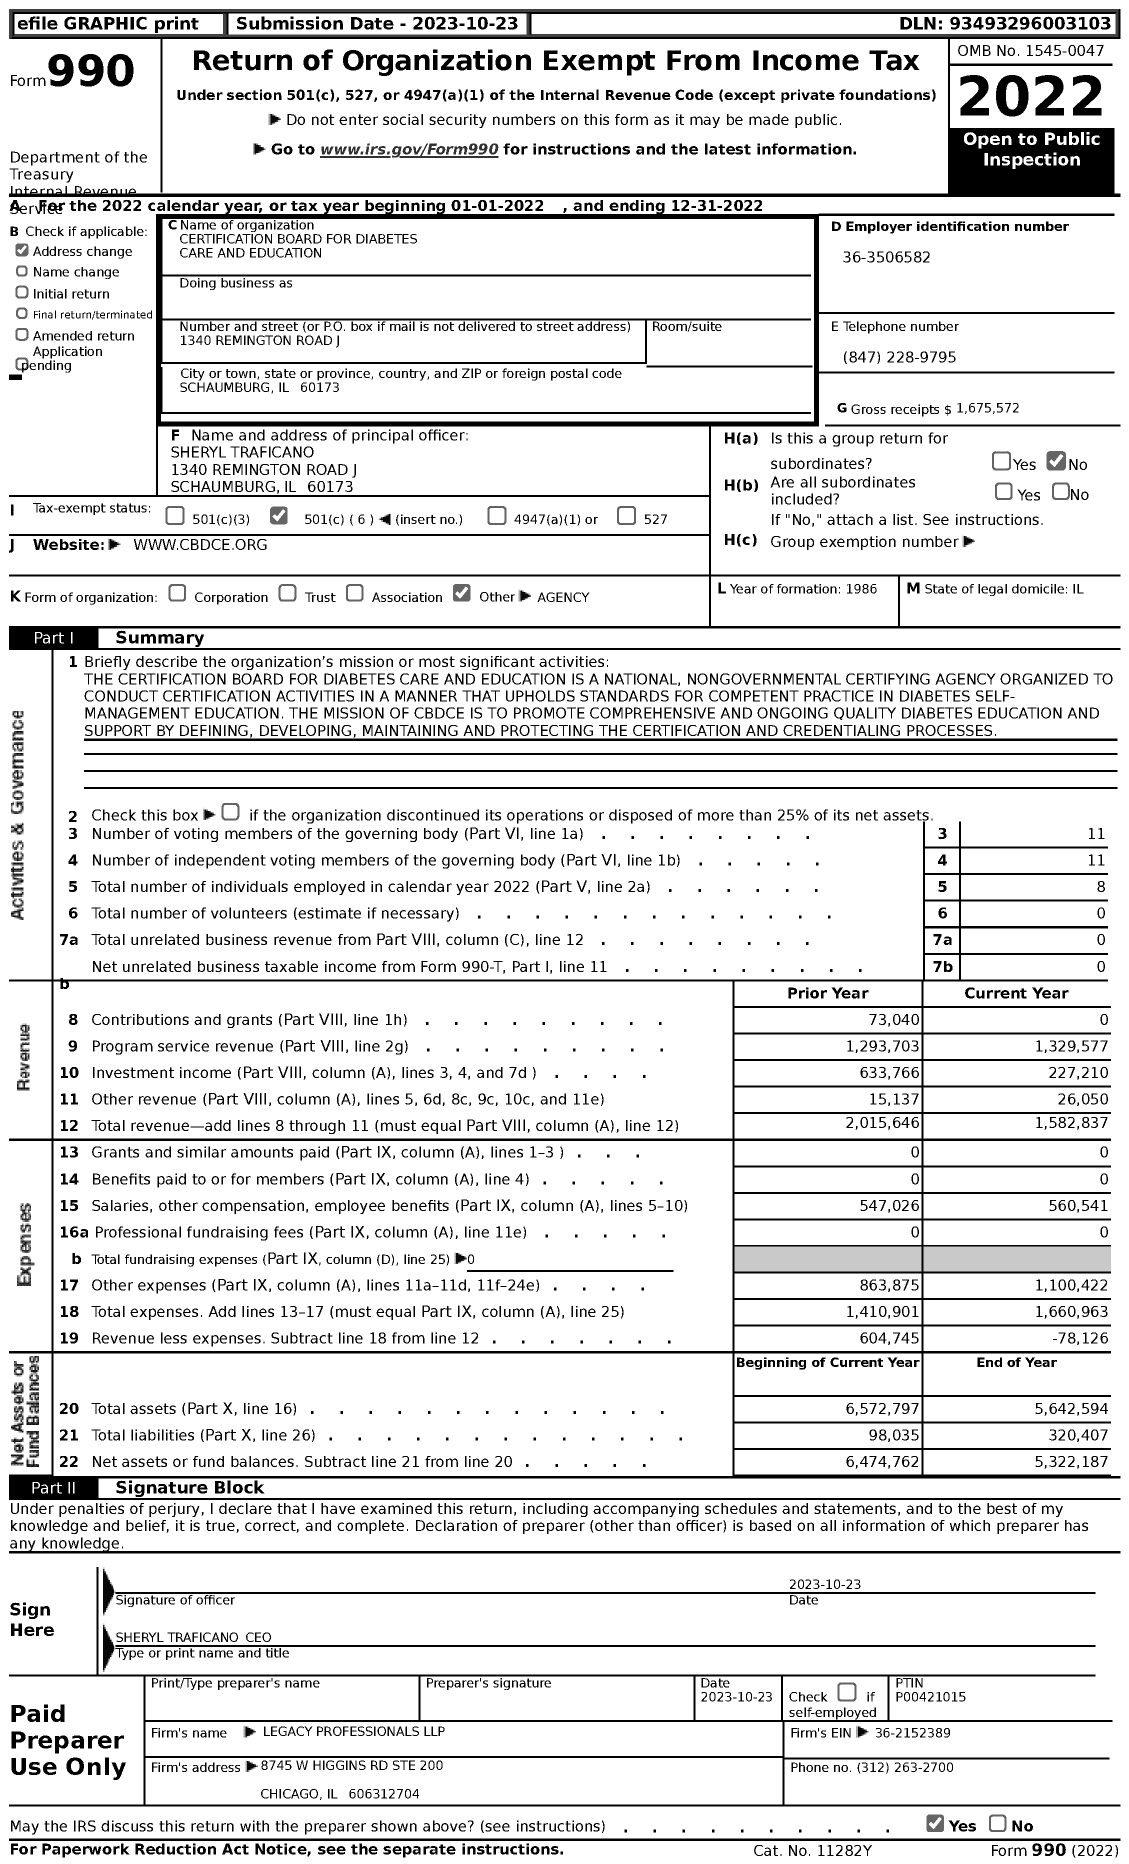 Image of first page of 2022 Form 990 for Certification Board for Diabetes Care and Education (NCBDE)